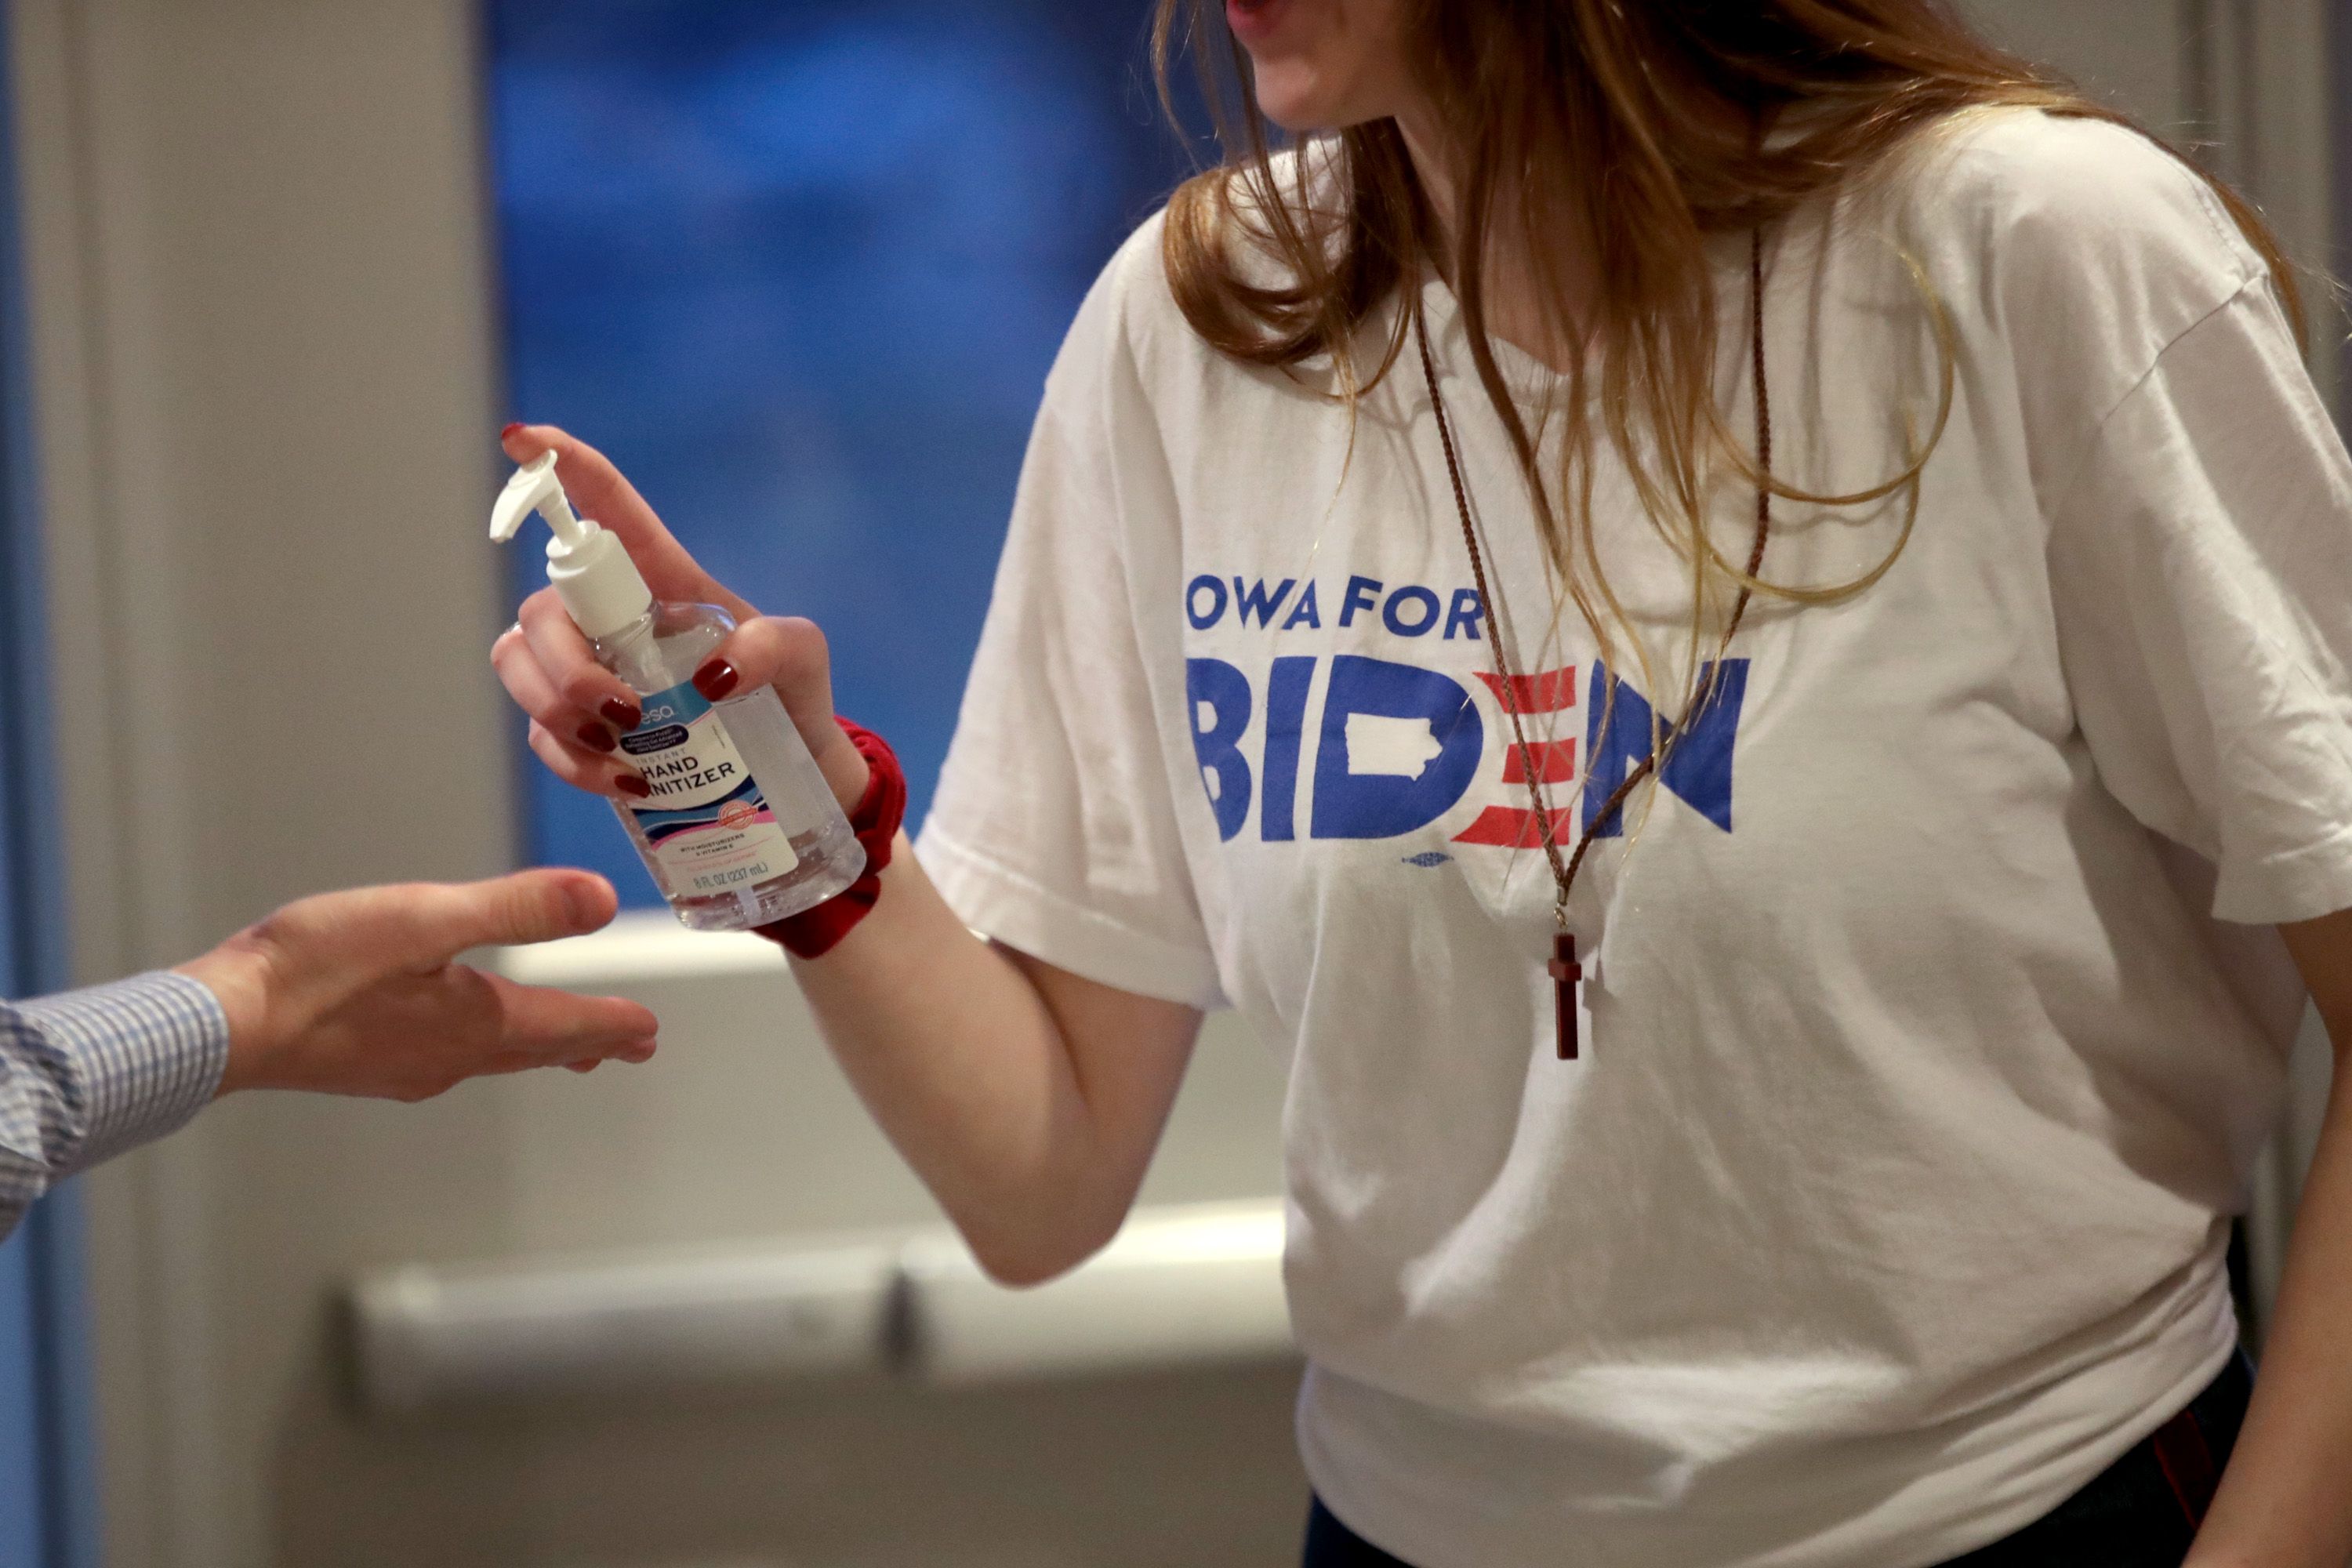 Campaign aide offers guests hand sanitizer before Biden rally